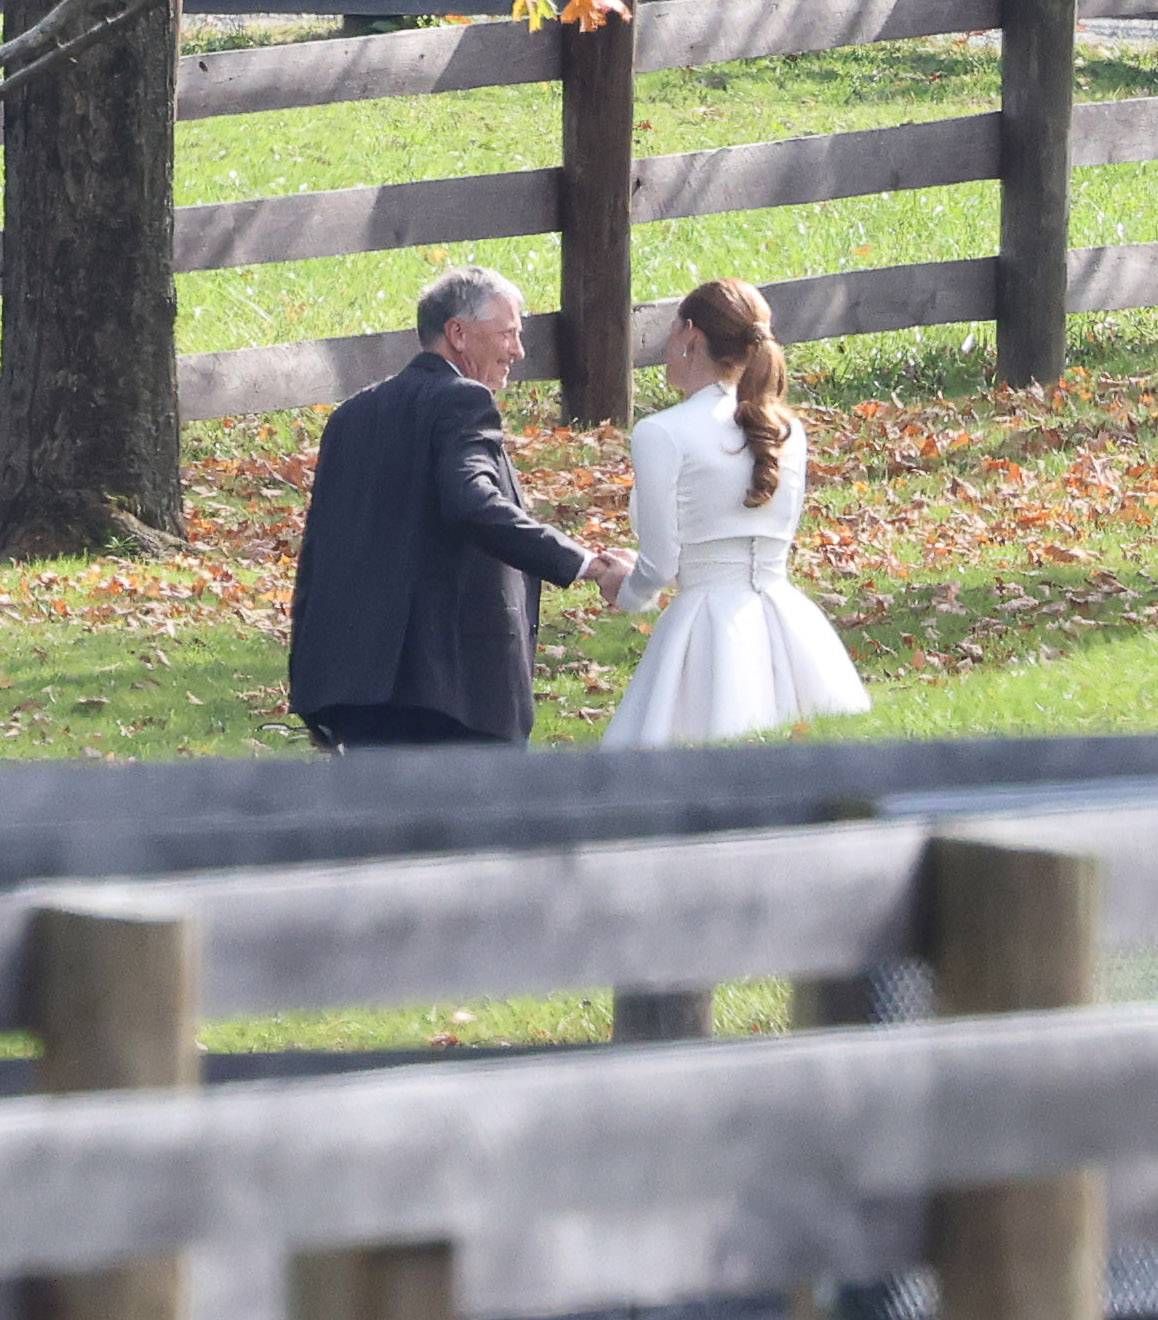 EXCLUSIVE: Jennifer Gates Appears to Greet Family and Guests Ahead of Her Wedding Ceremony.